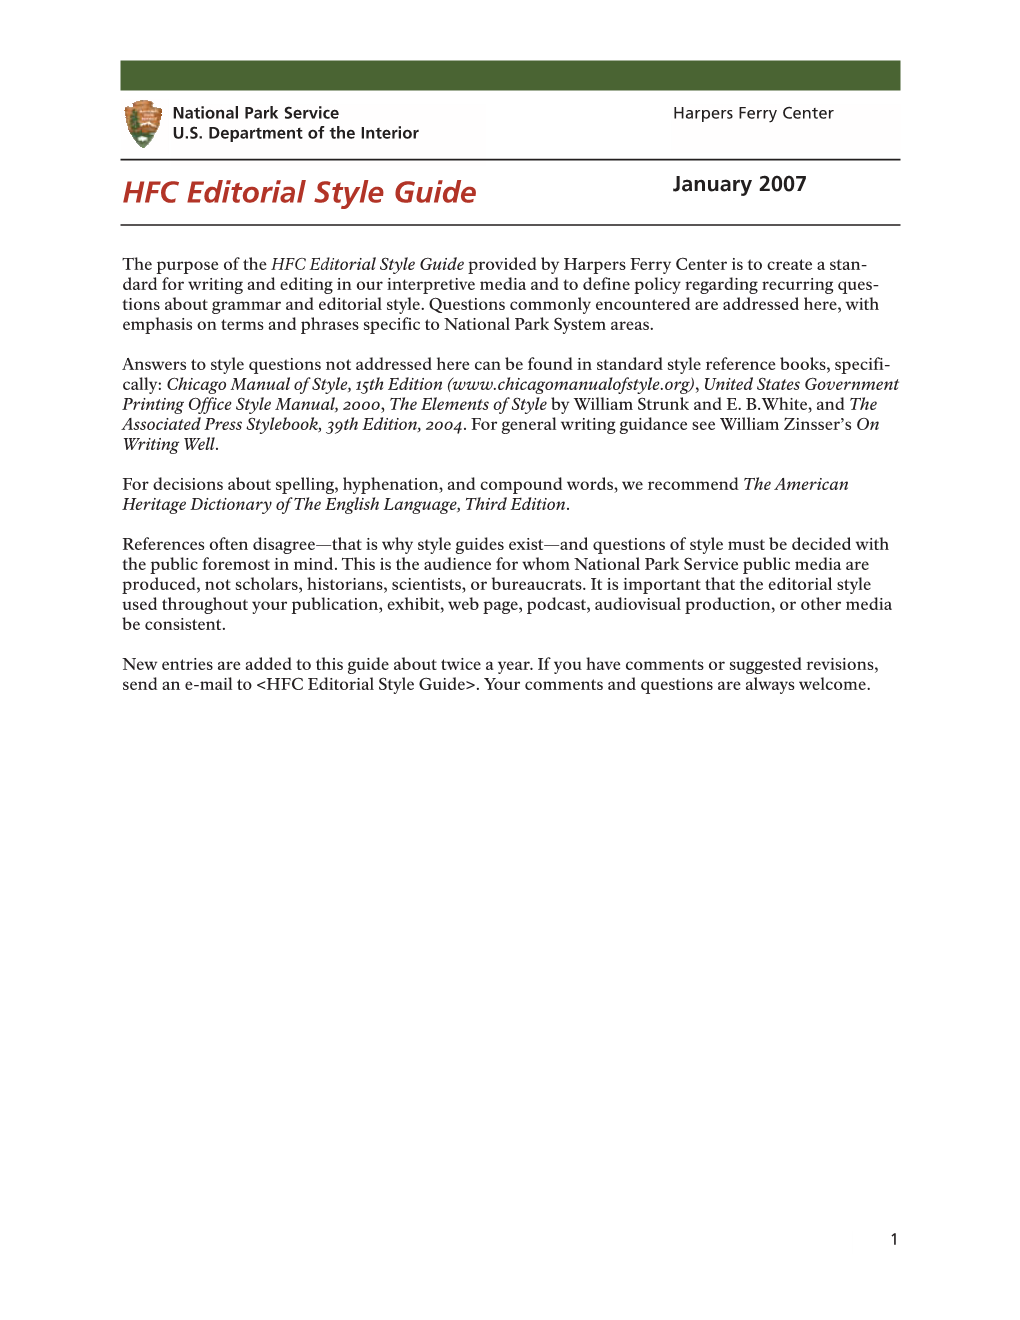 HFC Editorial Style Guide January 2007